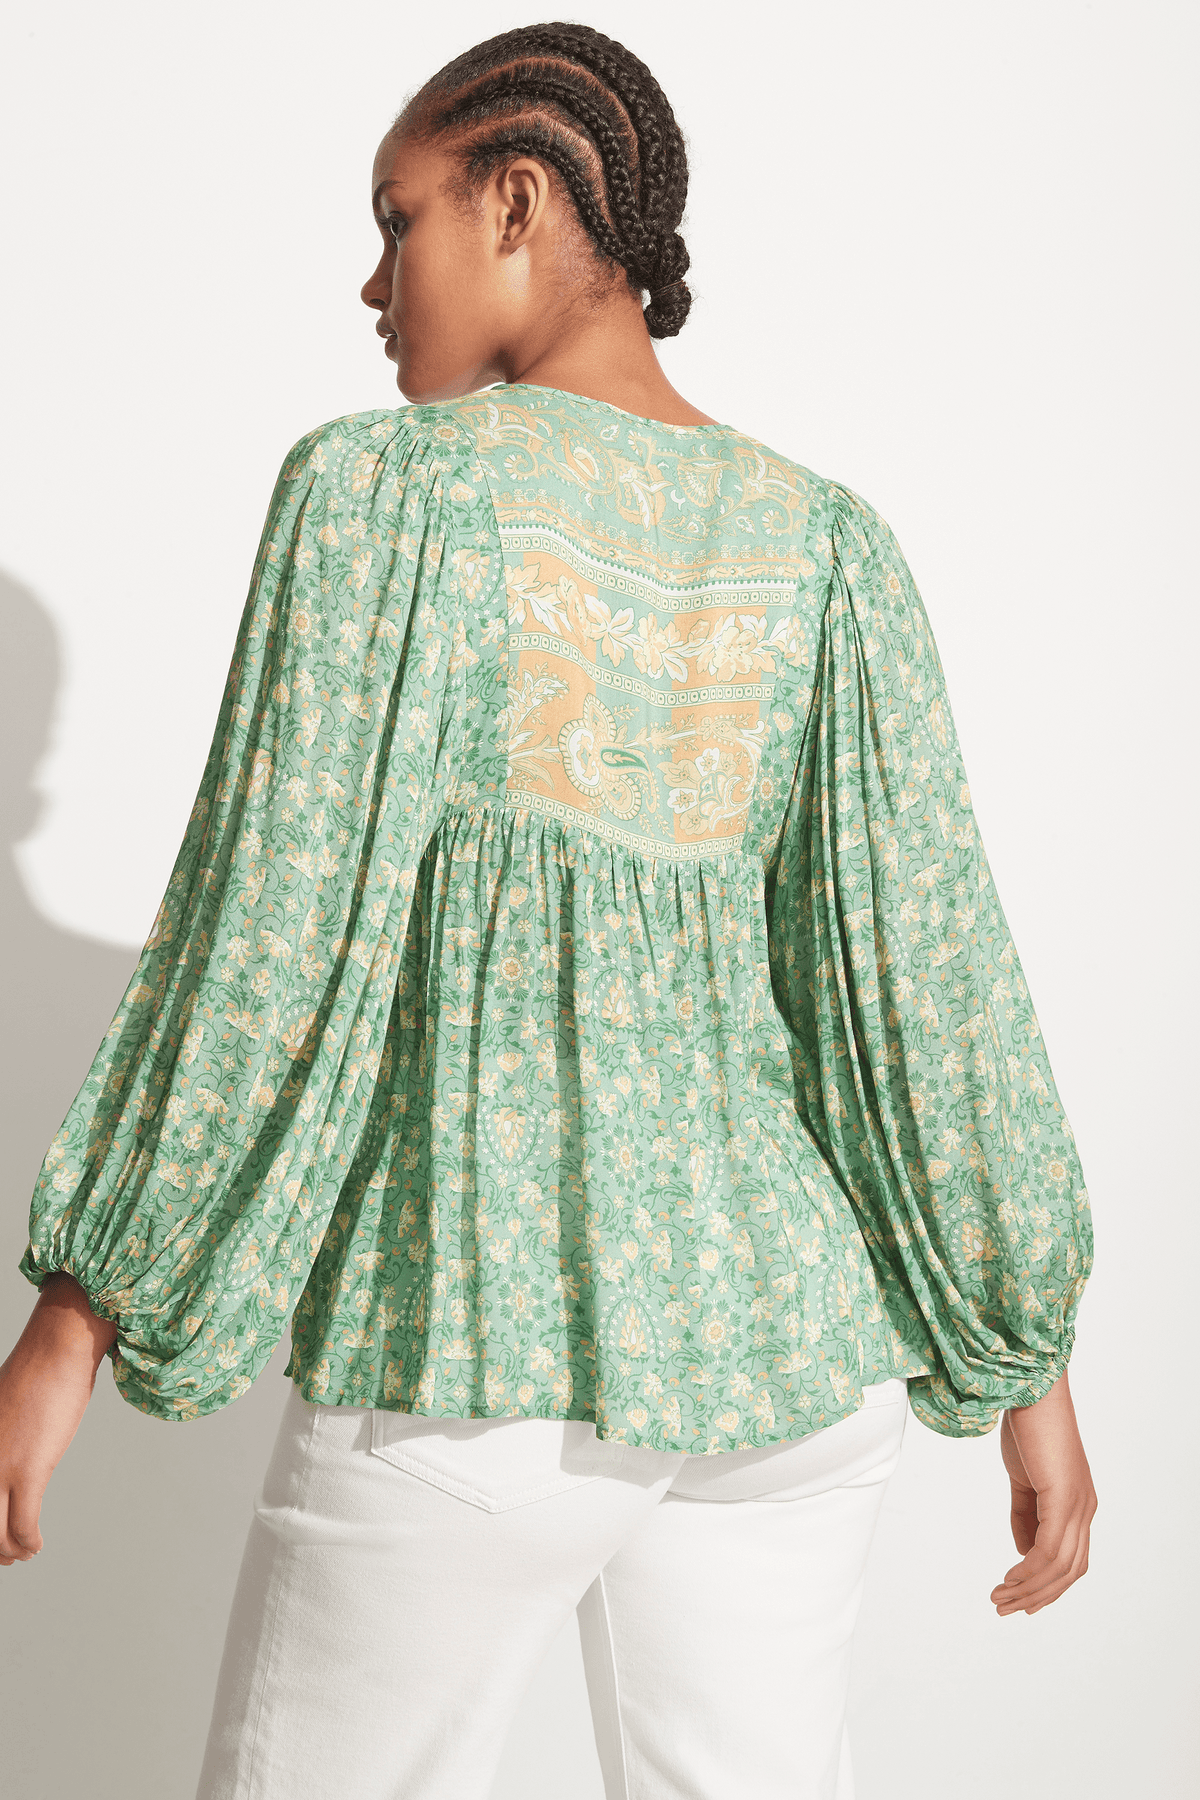 SPELL Madame peacock boho blouse in emerald